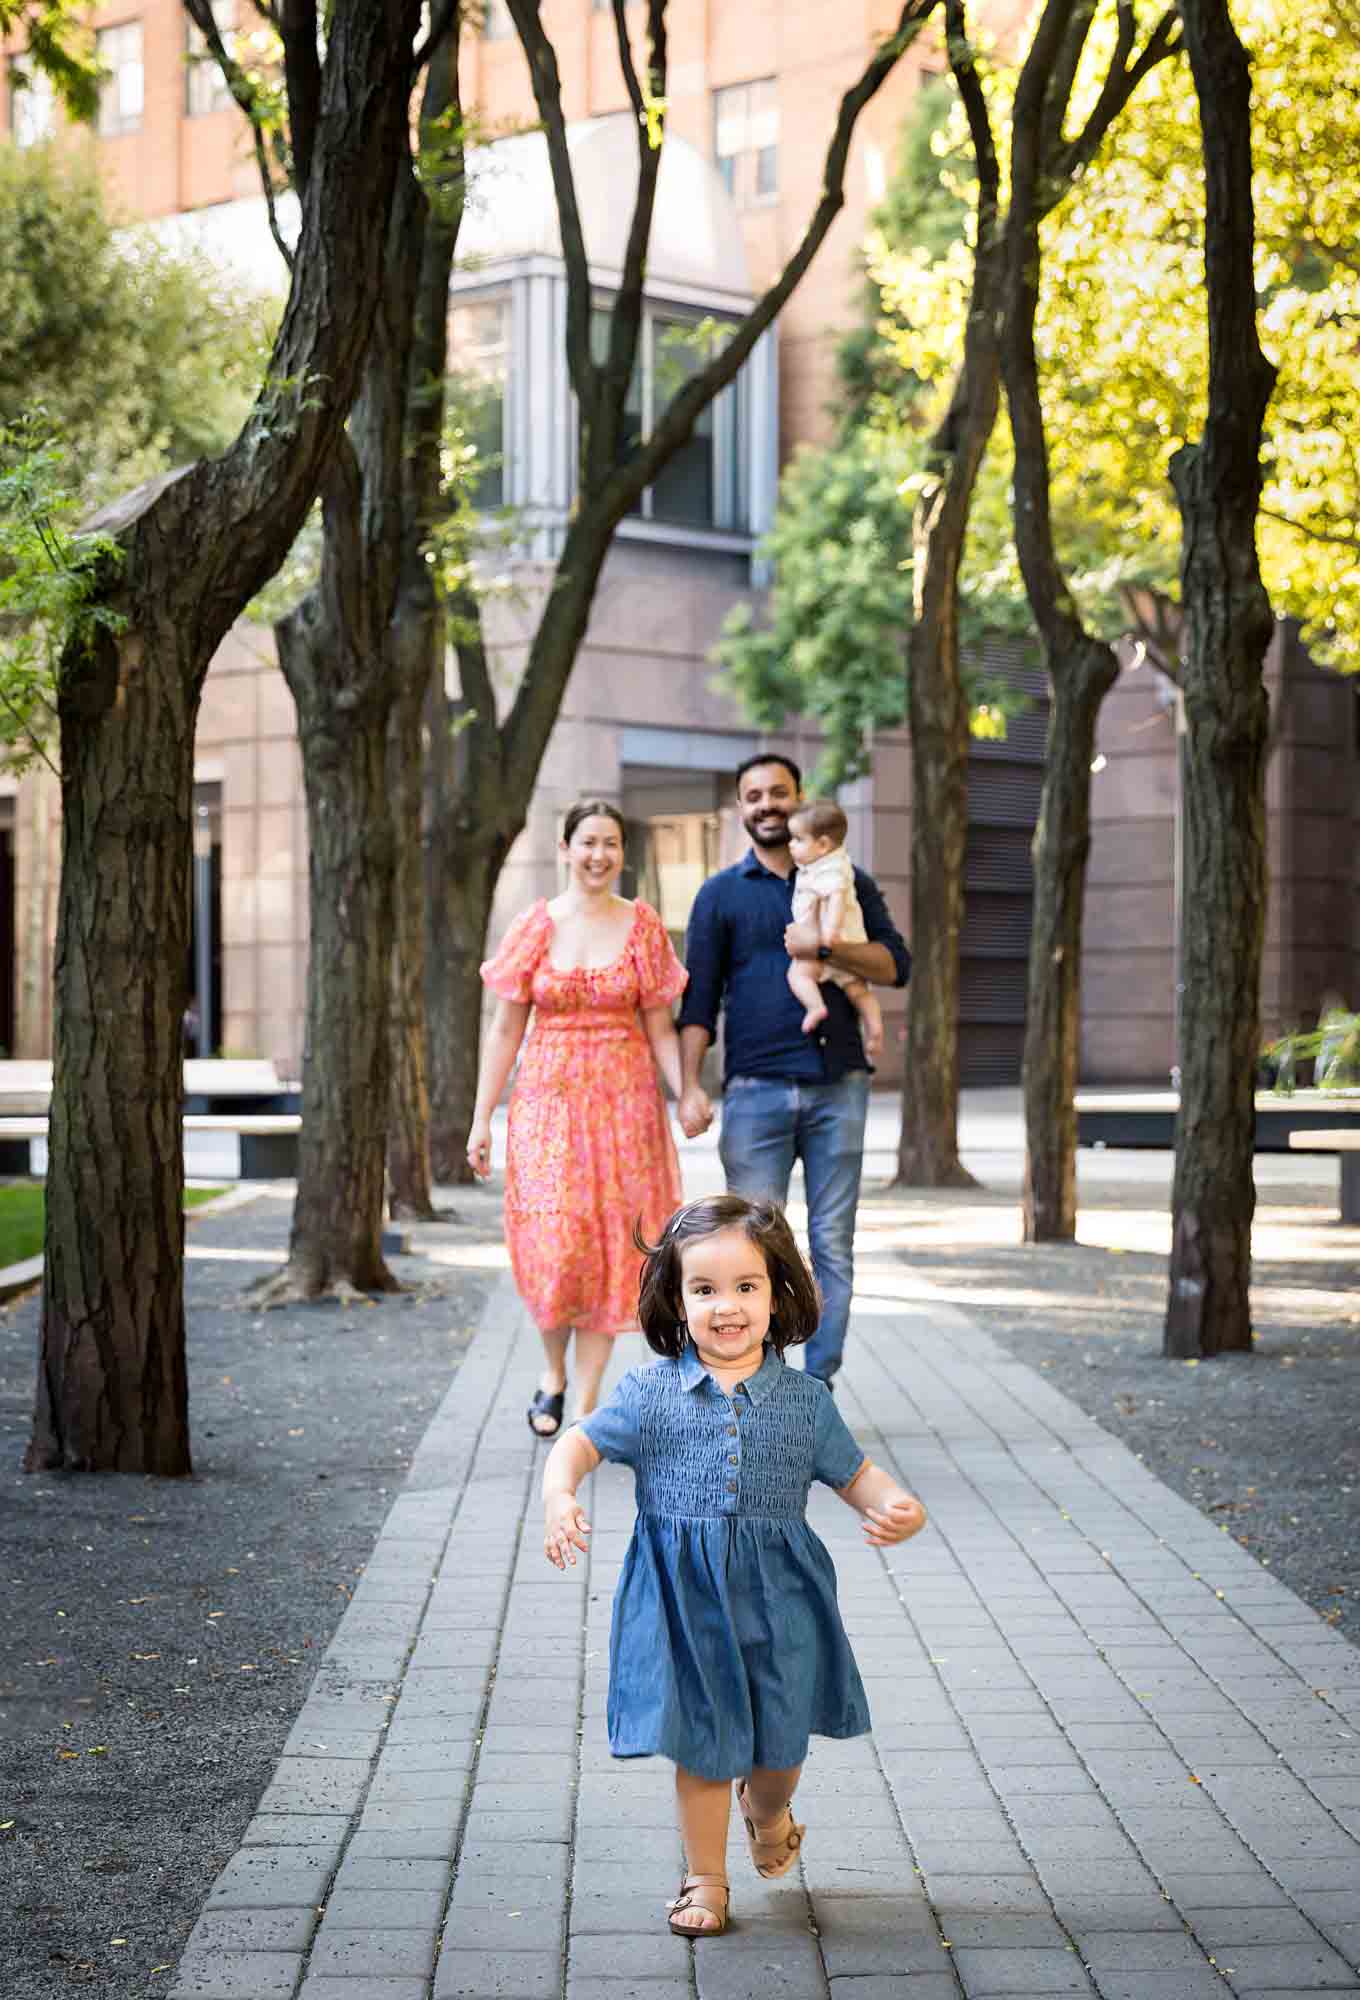 Parents with baby and little girl walking down stone pathway during a Brooklyn Commons family portrait session